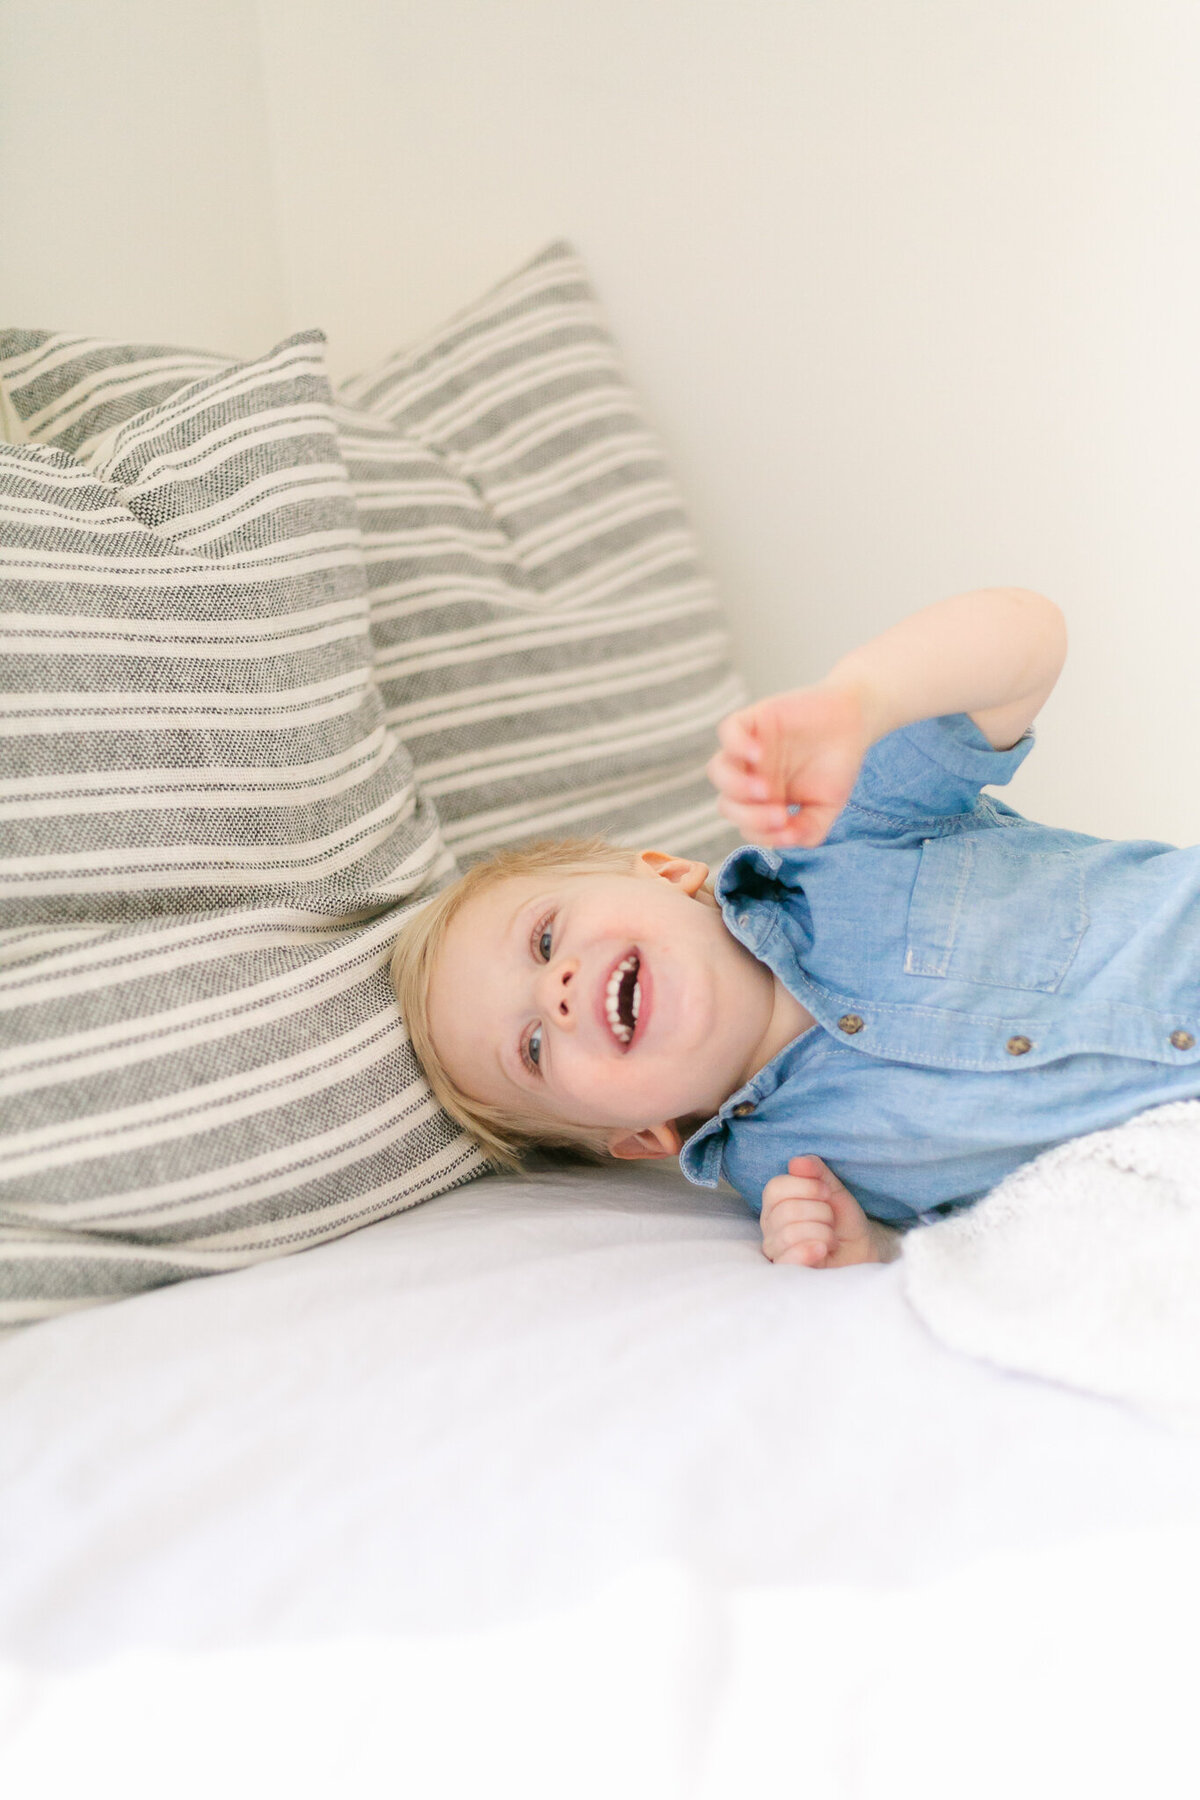 Rochester NY Newborn and Family Photography by Emi Rose